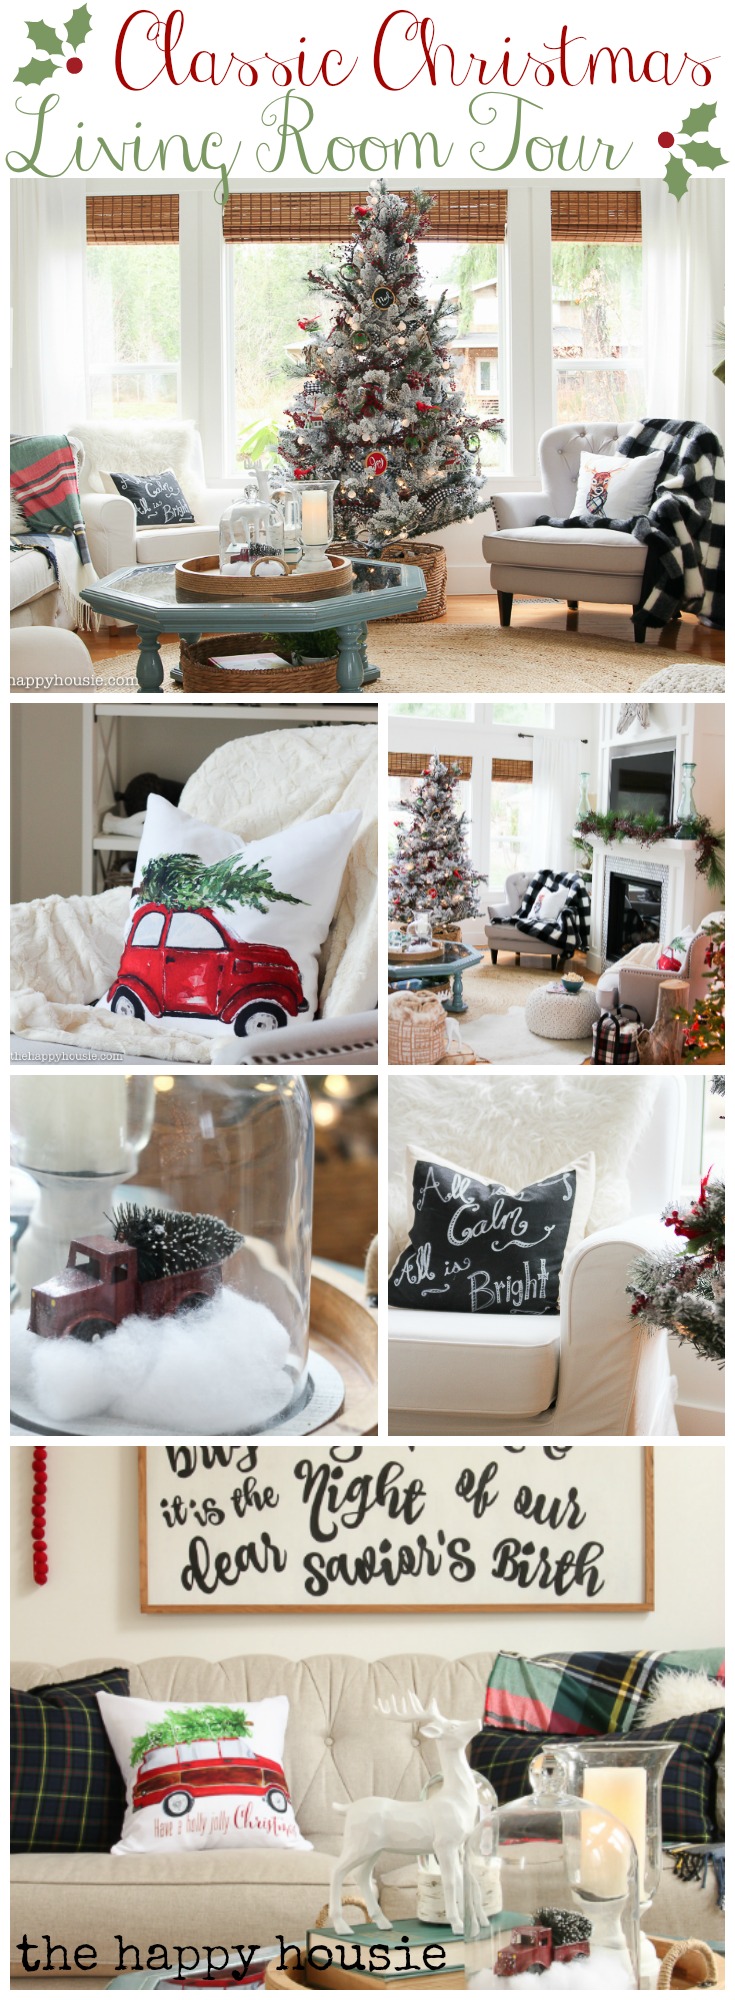 classic-christmas-living-room-tour-for-the-all-through-the-house-christmas-tour-series-at-the-happy-housie